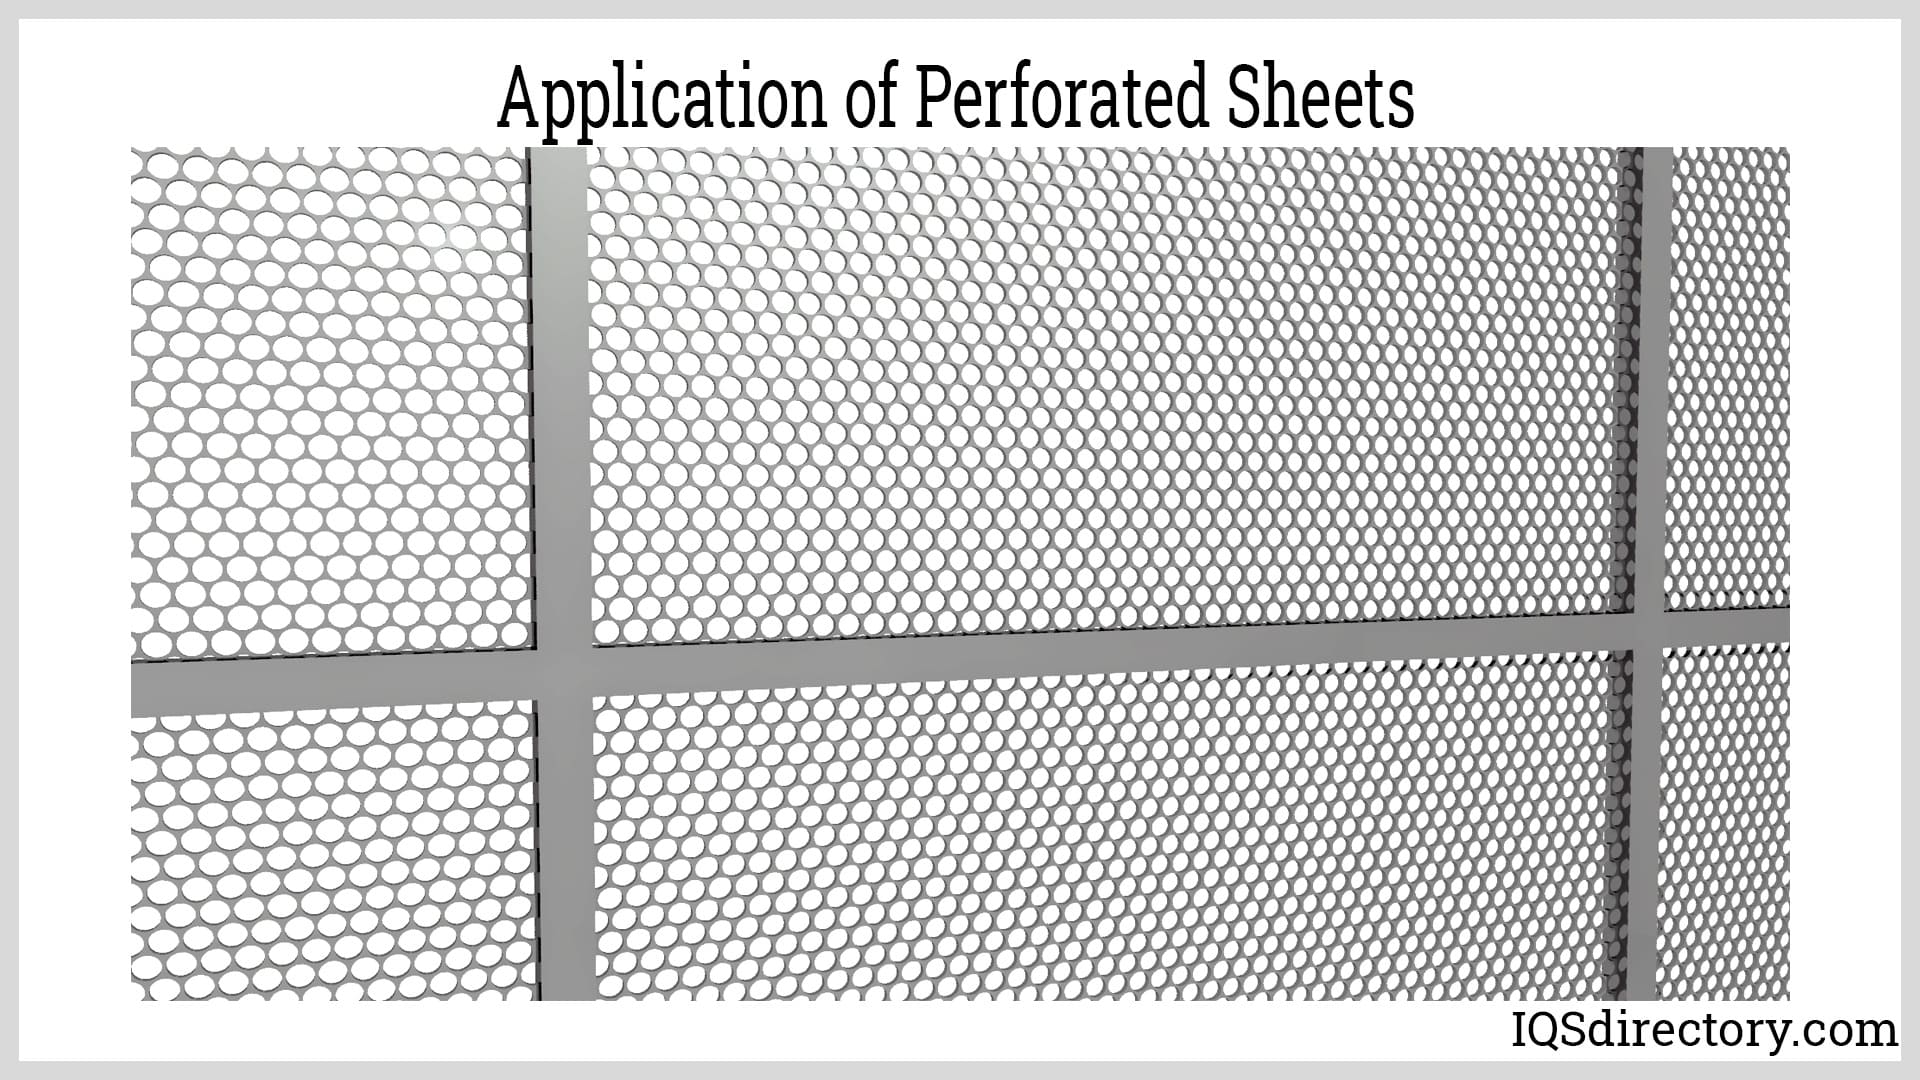 Application of Perforated Sheets